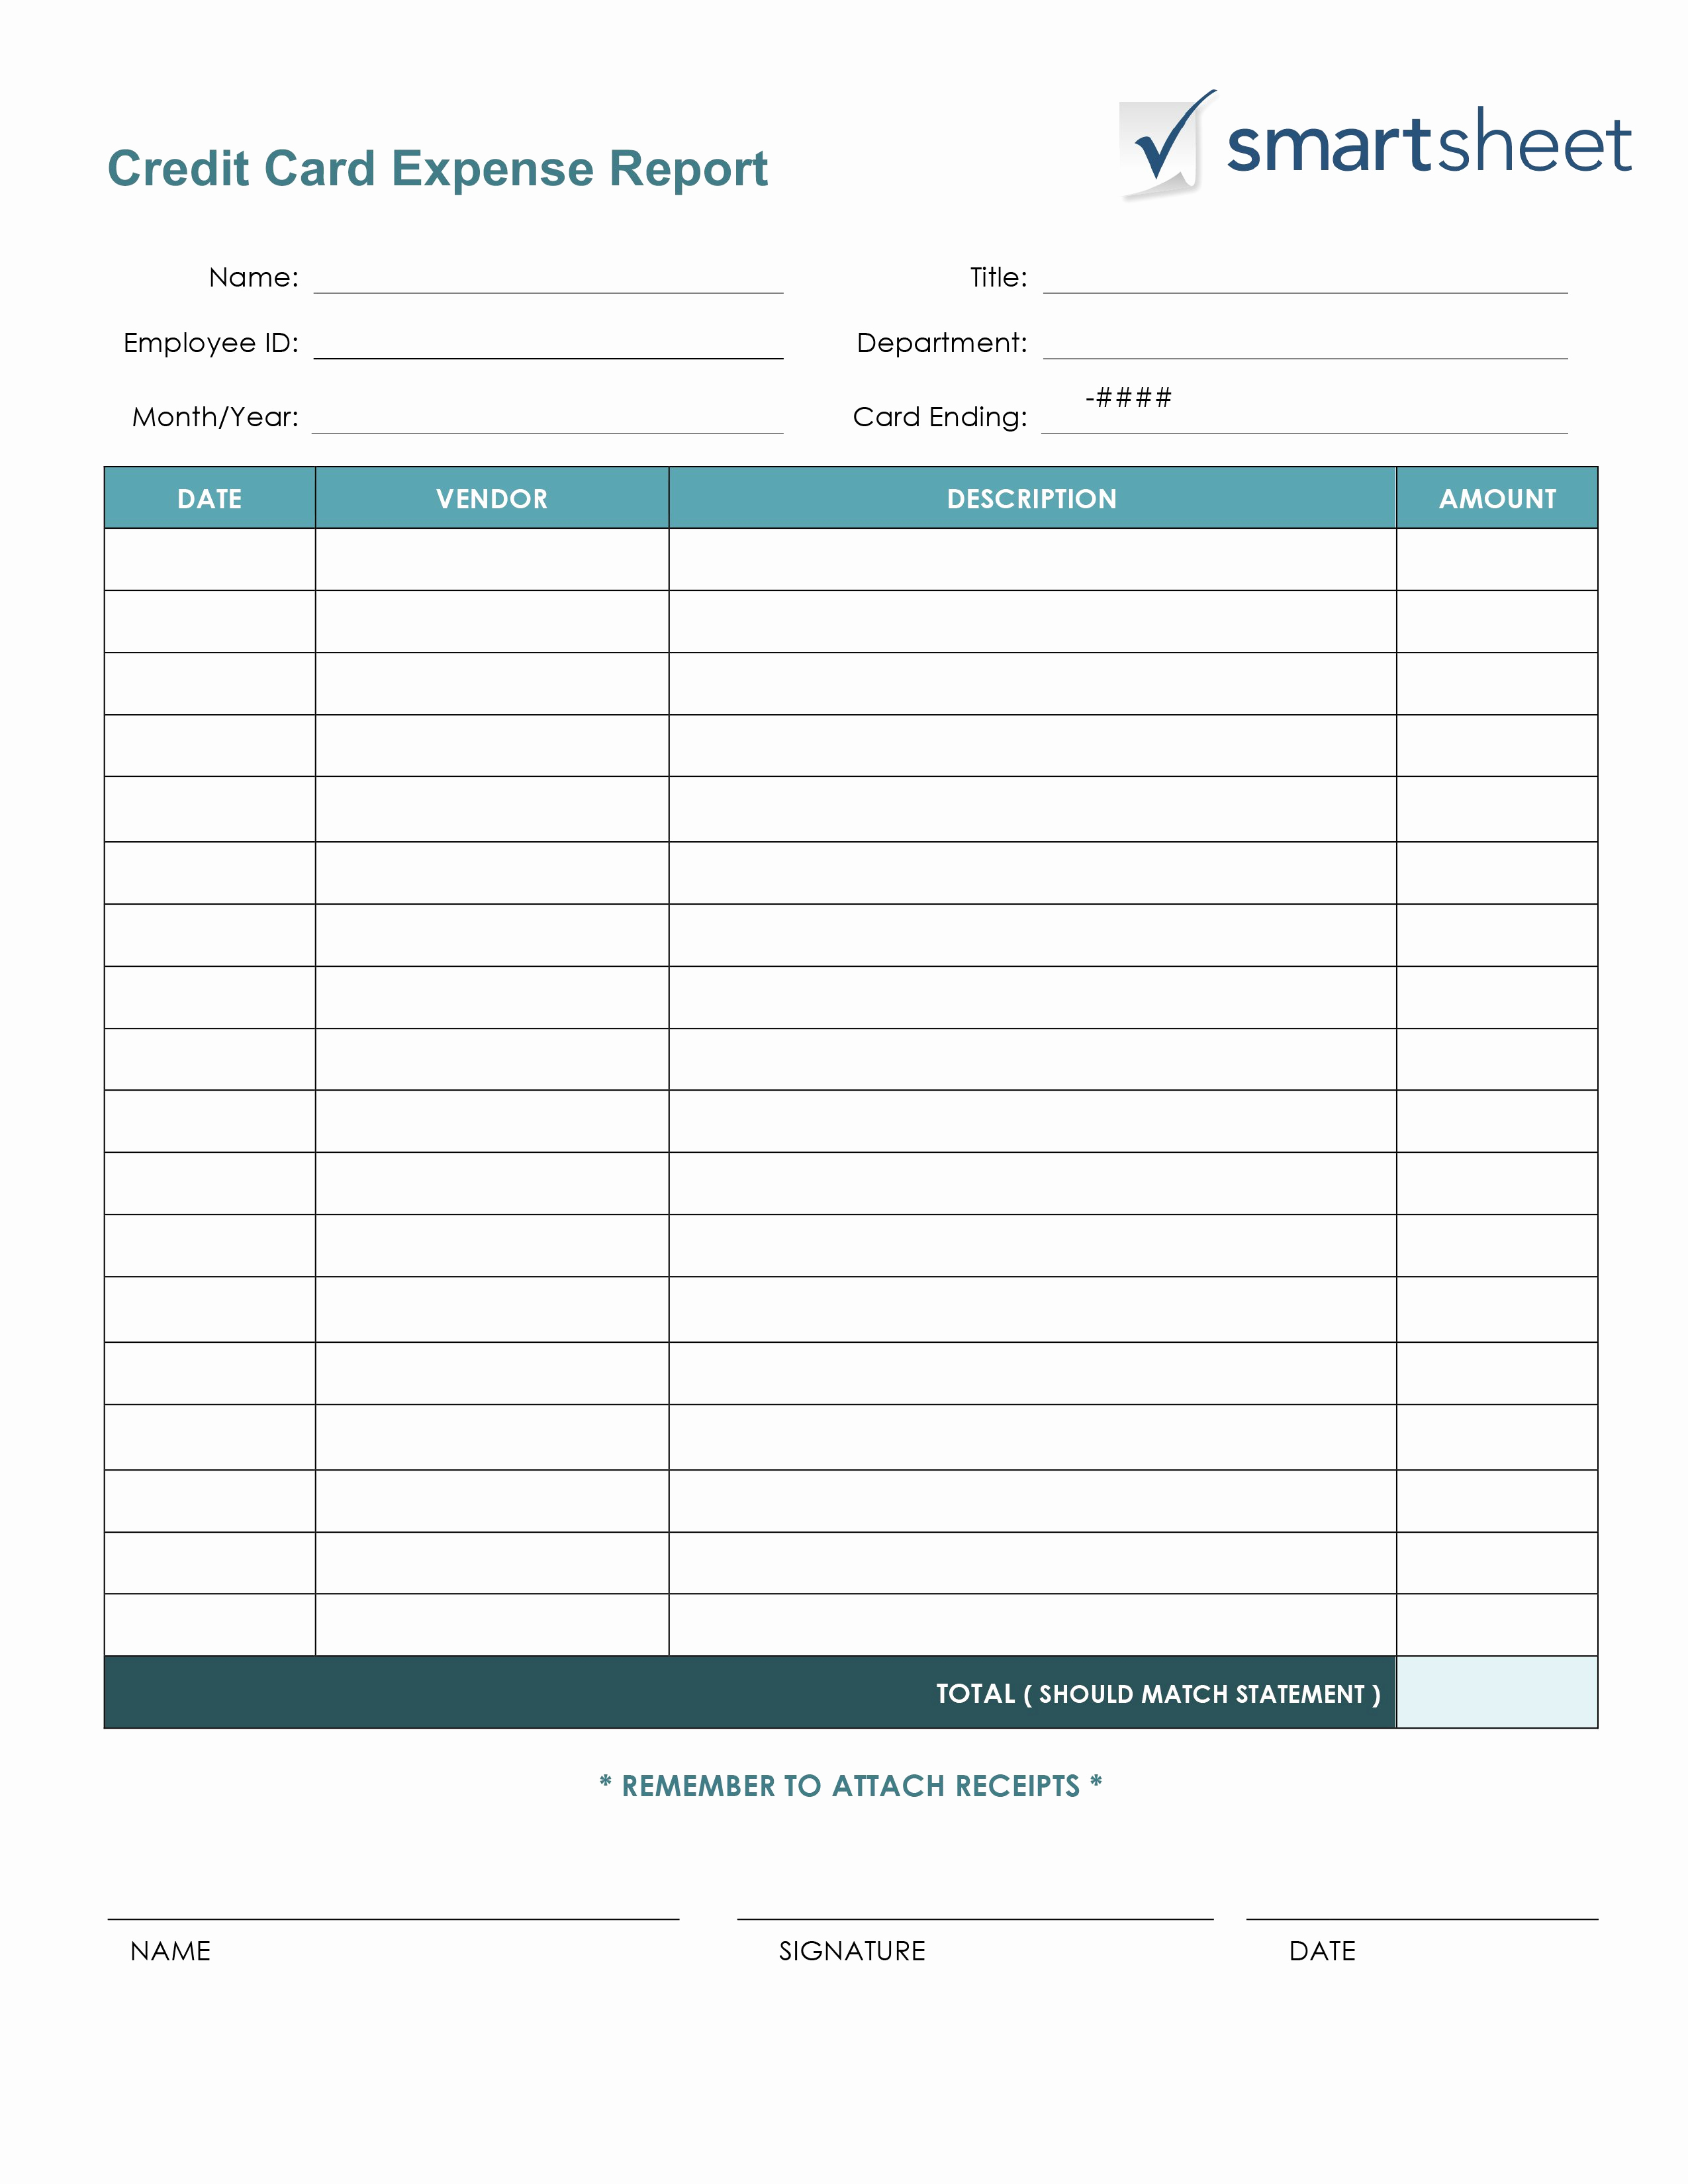 Free Expense Report Template Luxury Free Expense Report Templates Smartsheet